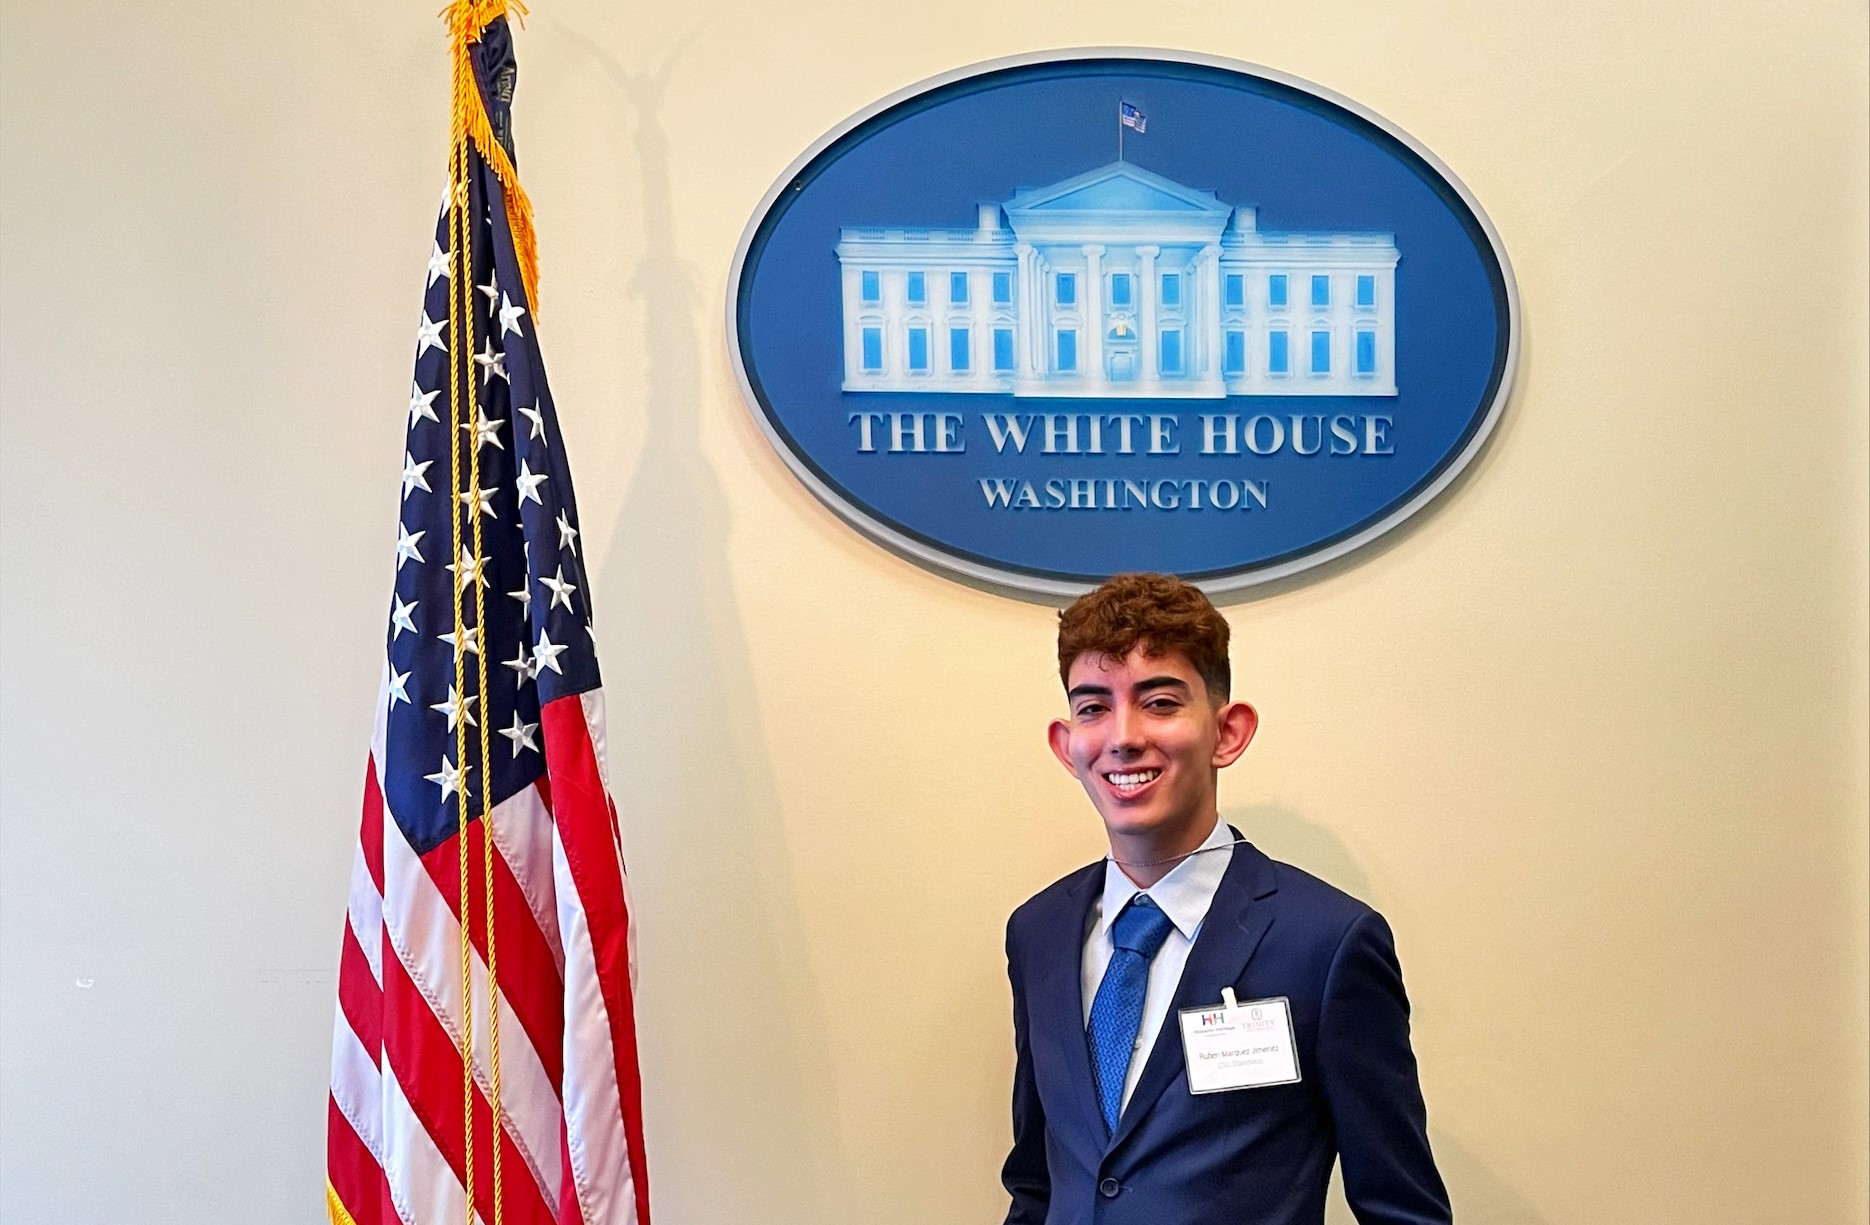 a young person wearing a suit posing in front of a photo of the white house